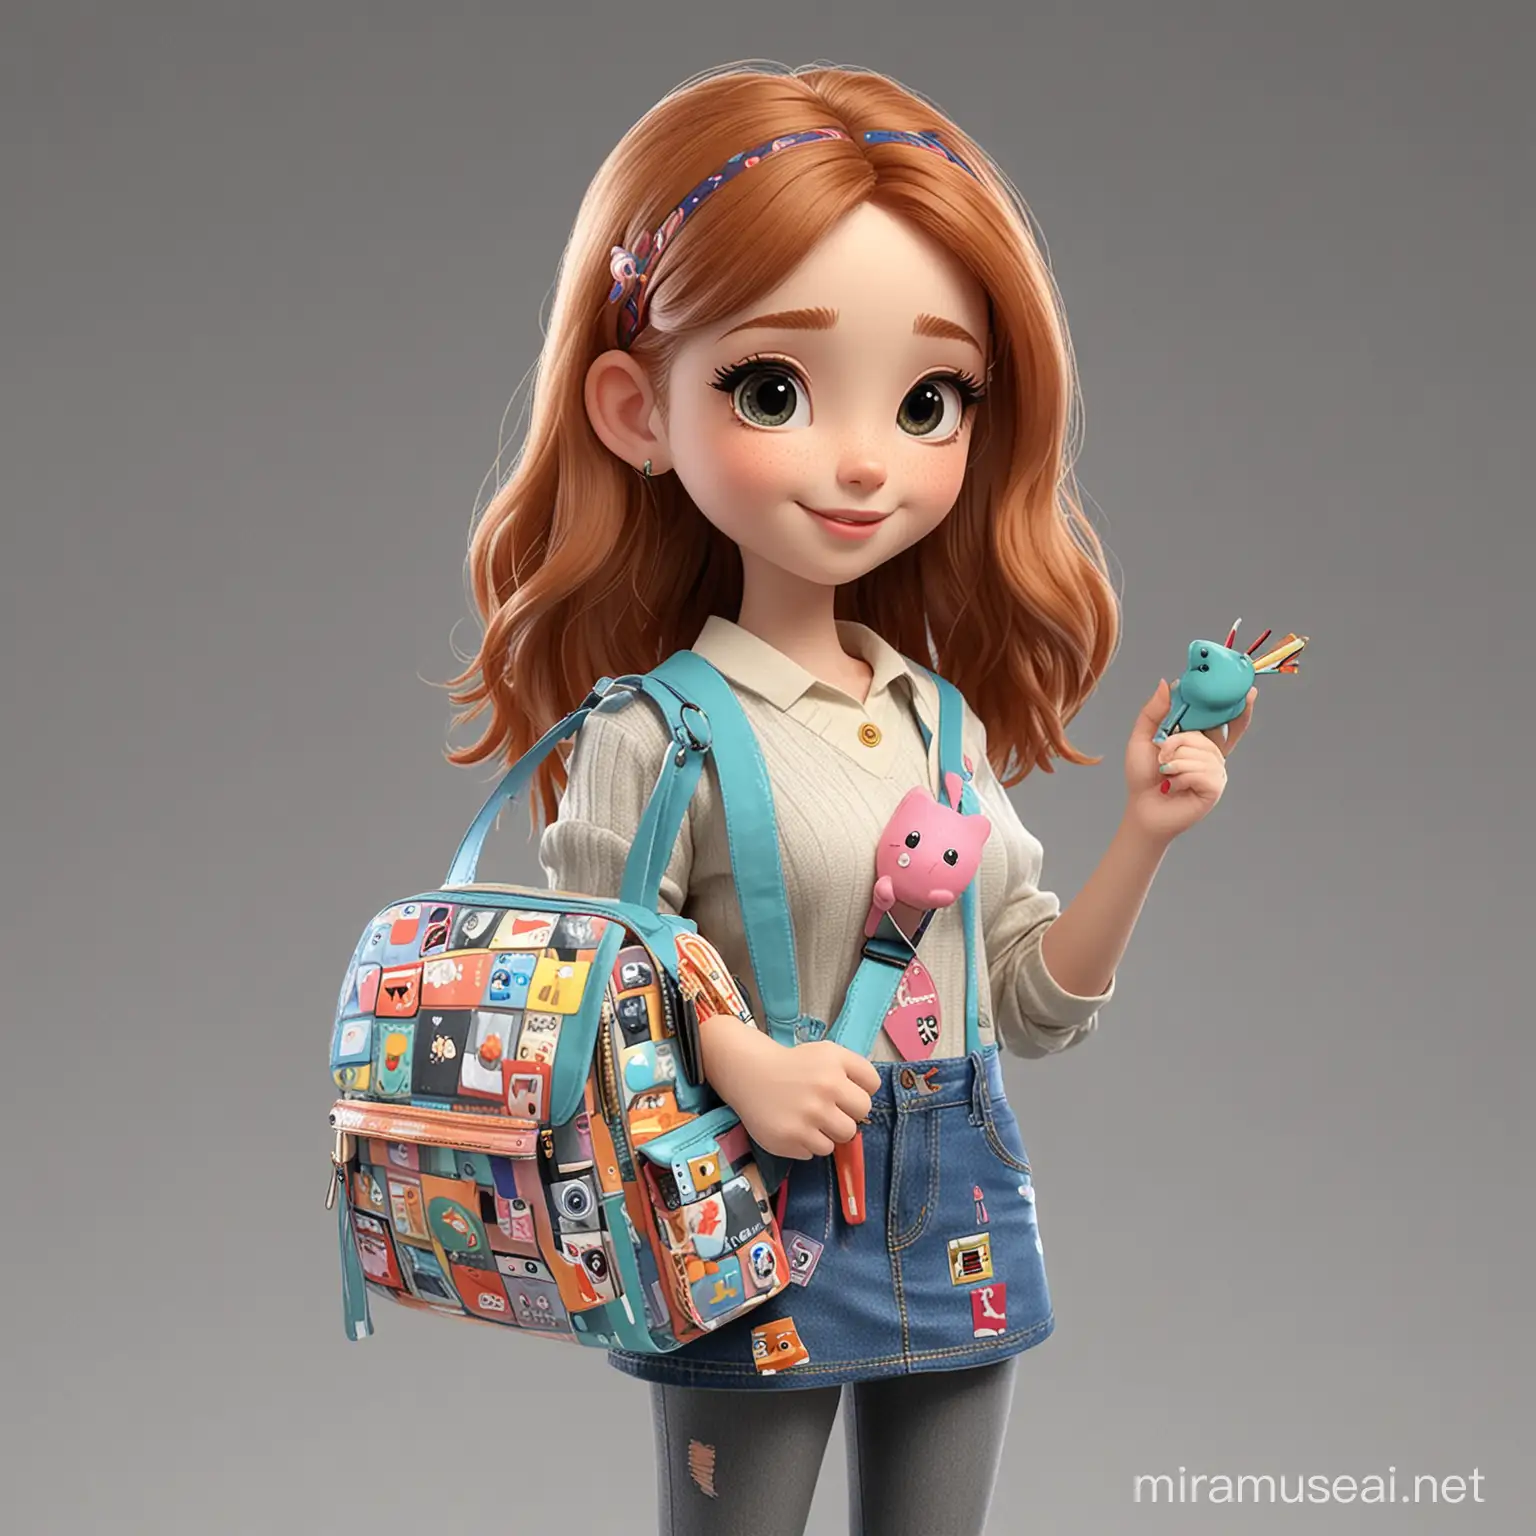 Adorable 3D Collage Student with Backpack